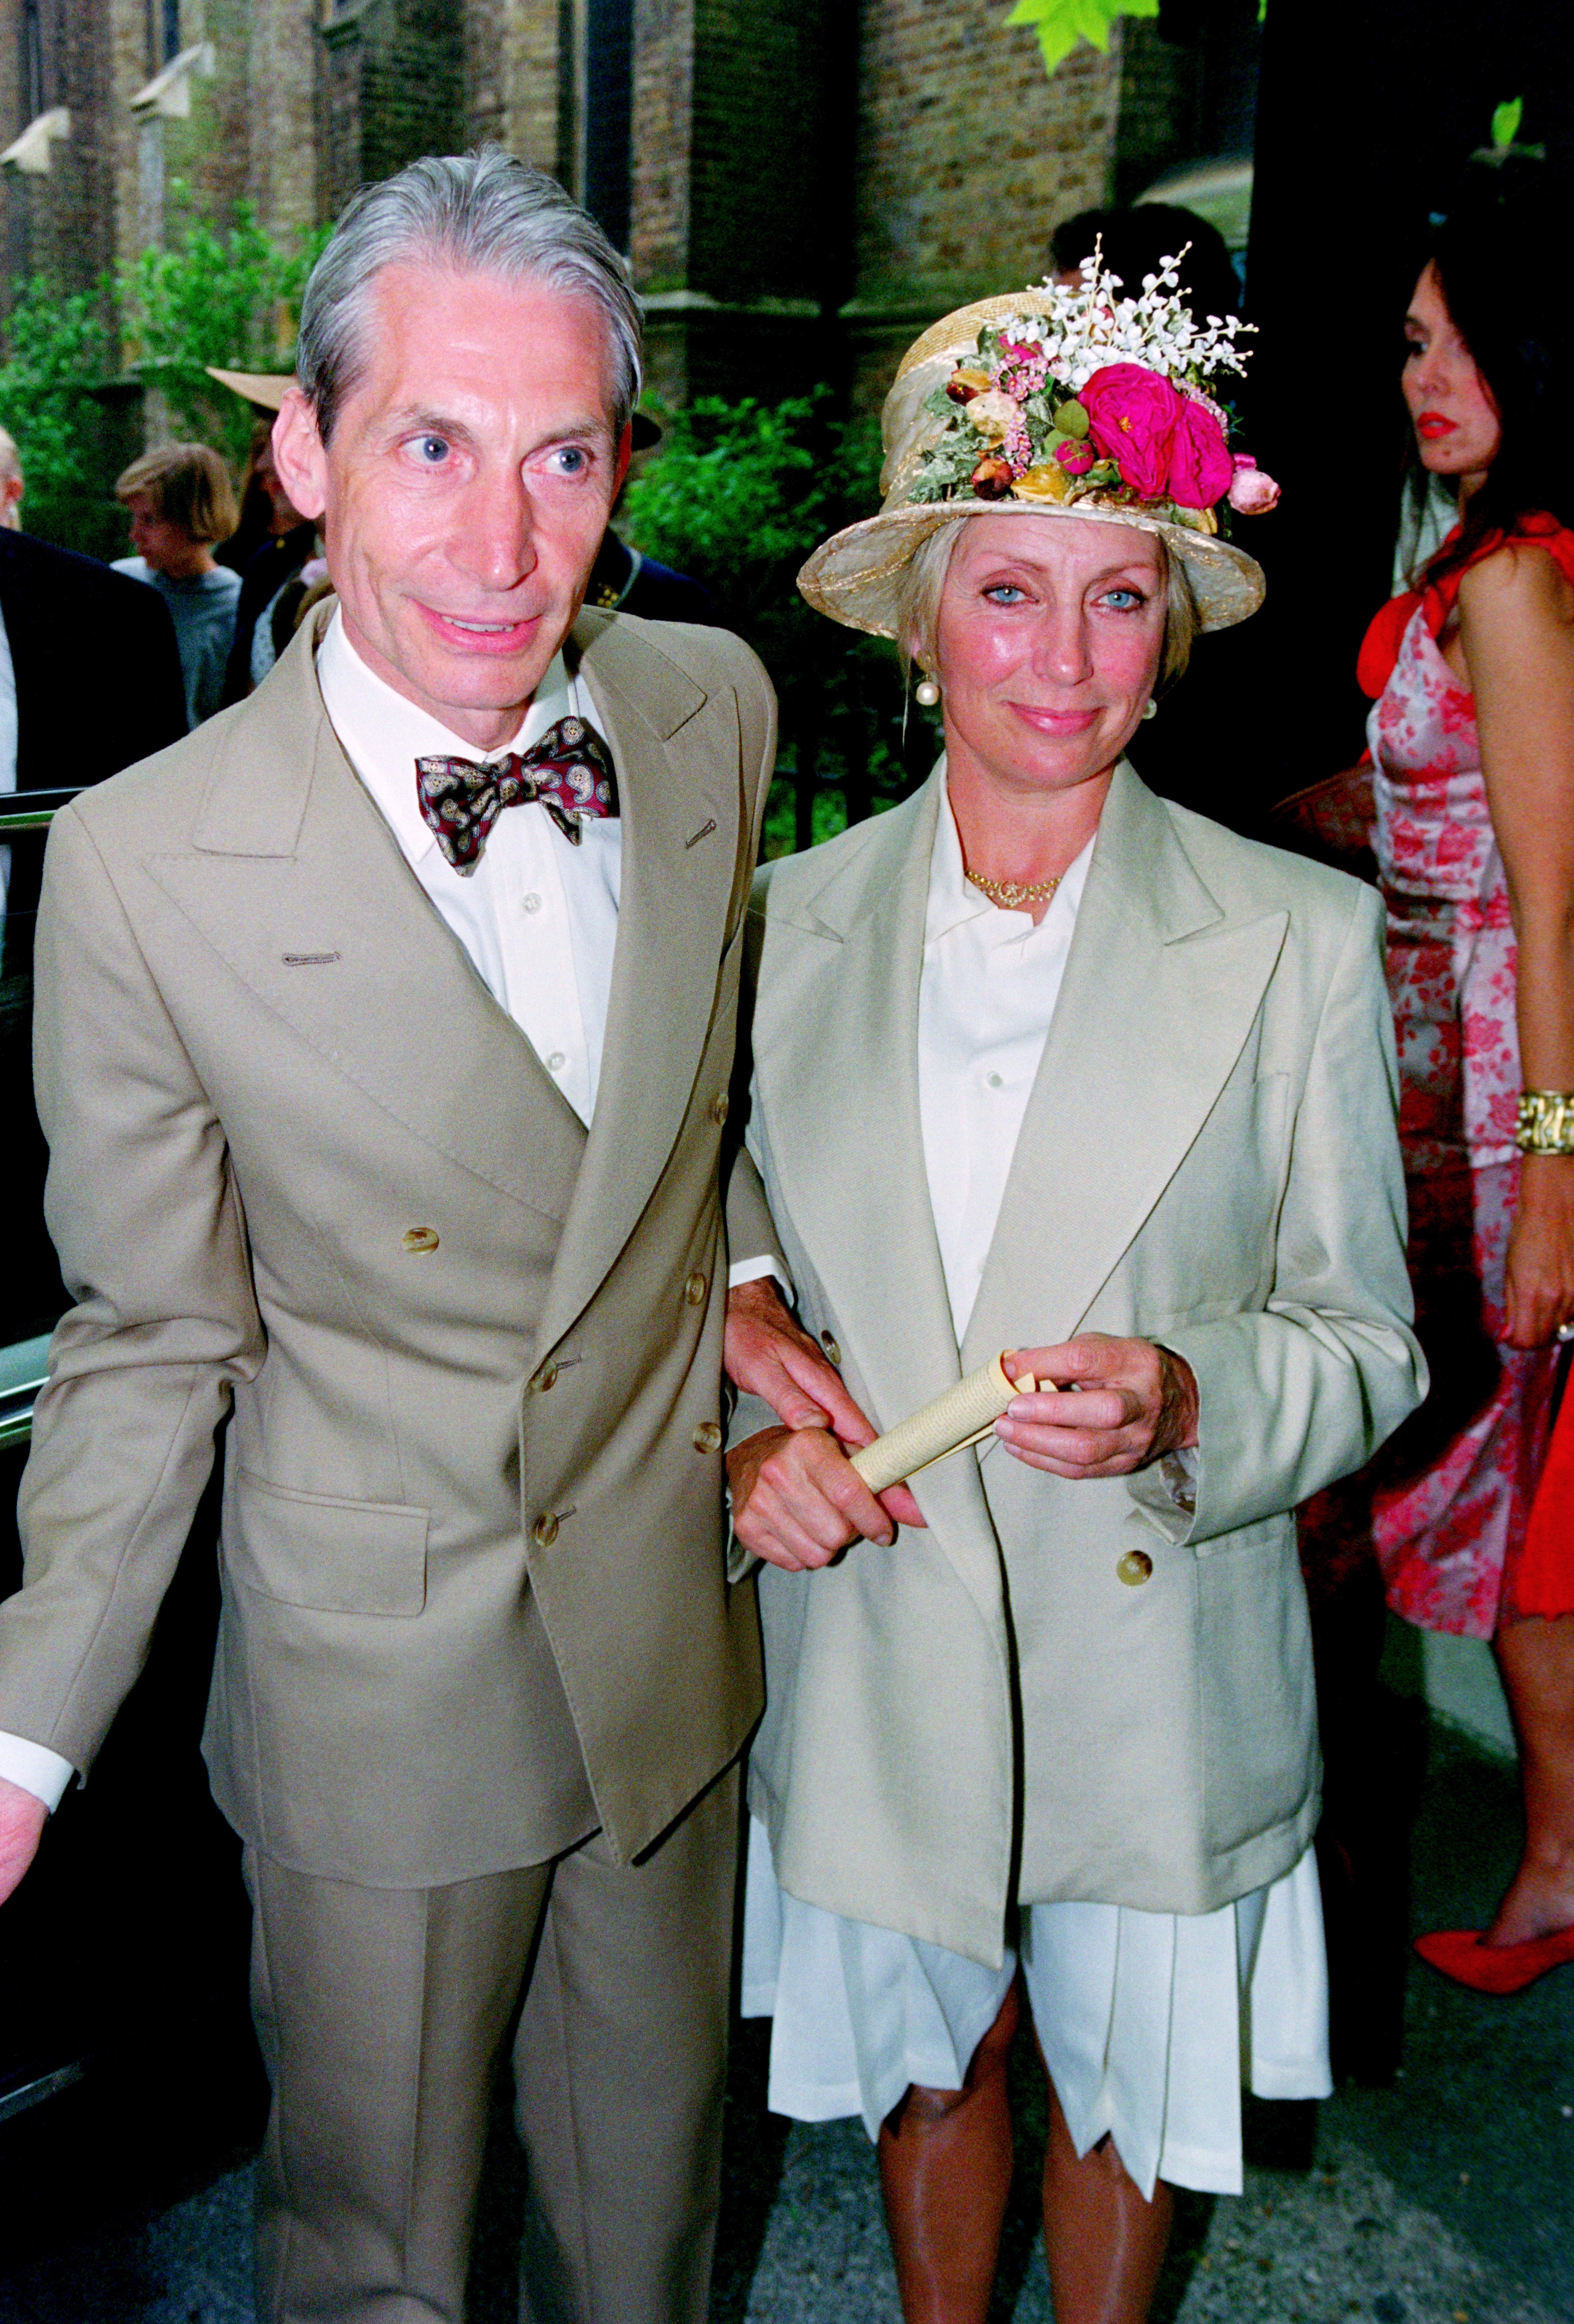 Drummer of The Rolling Stones, Charlie Watts and his wife Shirley Ann Shepherd, attend Georgia May Jagger's christening at Saint Andrew's church, Richmond in 1992. (Photo by Dave Hogan/Hulton Archive/Getty Images) (Foto: Getty Images)